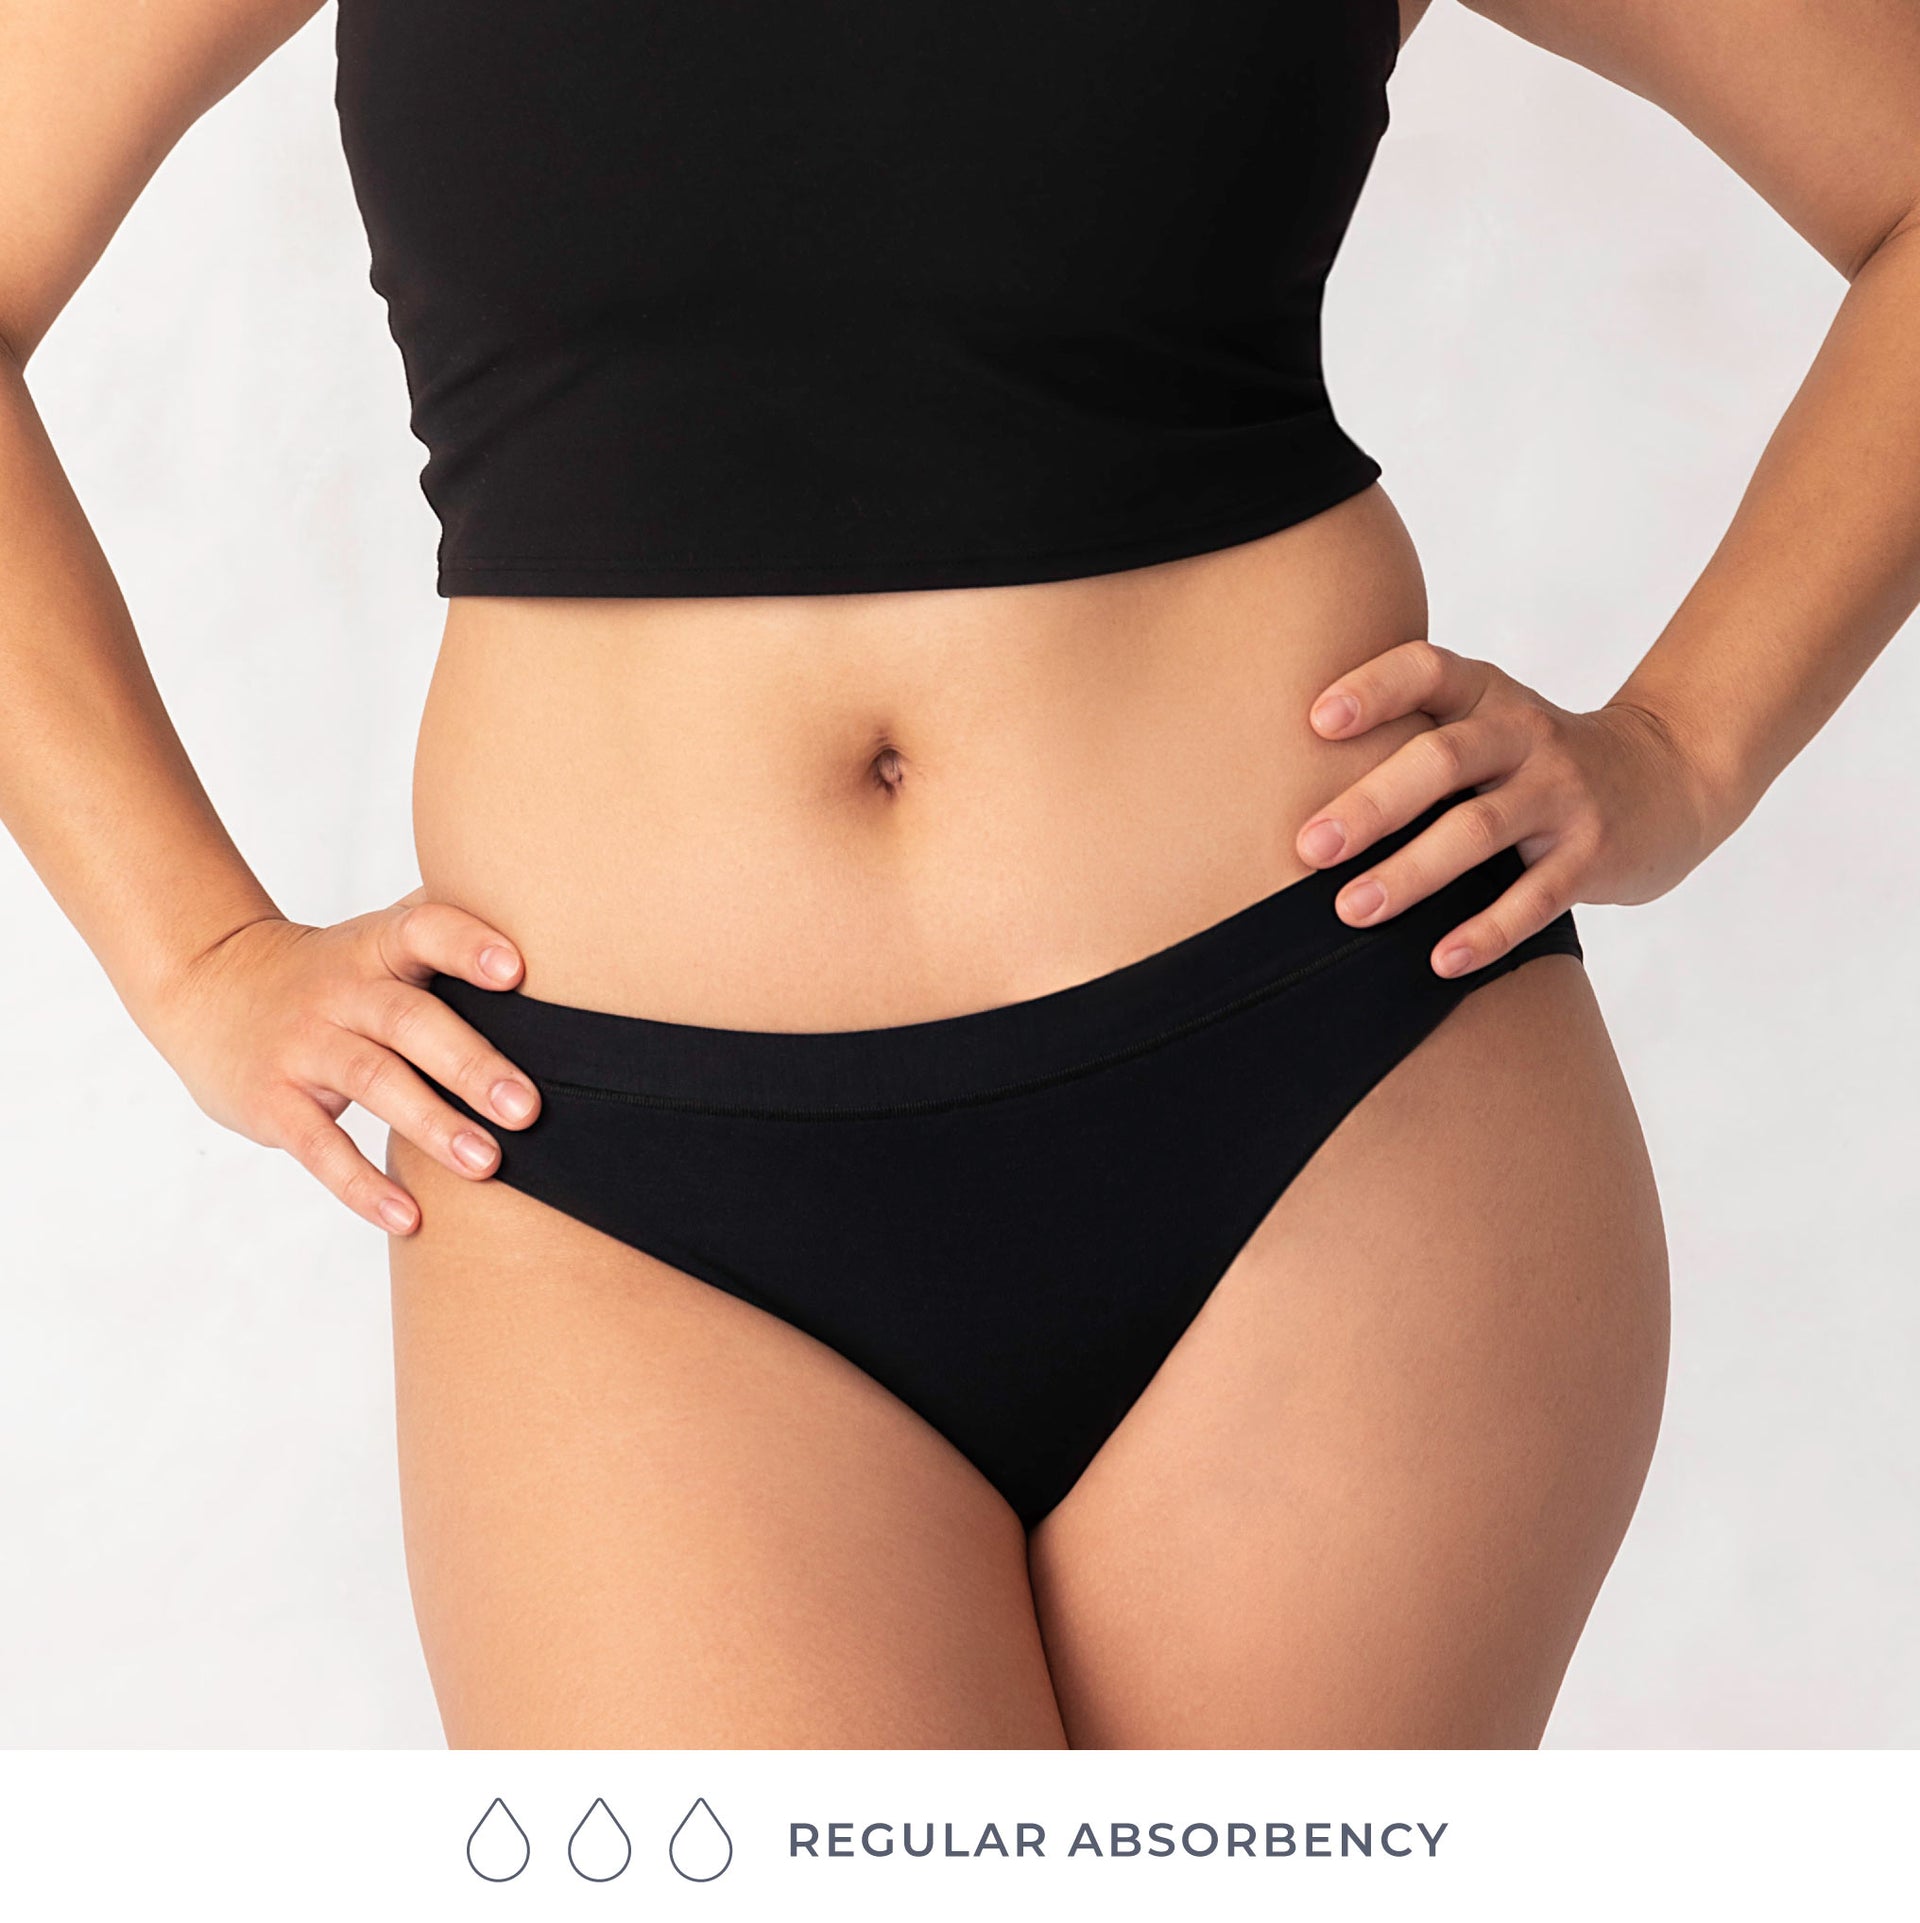 saalt Reusable Period Underwear - Comfortable, Thin, and Keeps You Dry from  All Leaks(Comfort Bikini, Medium, Volcanic Black) at  Women's  Clothing store